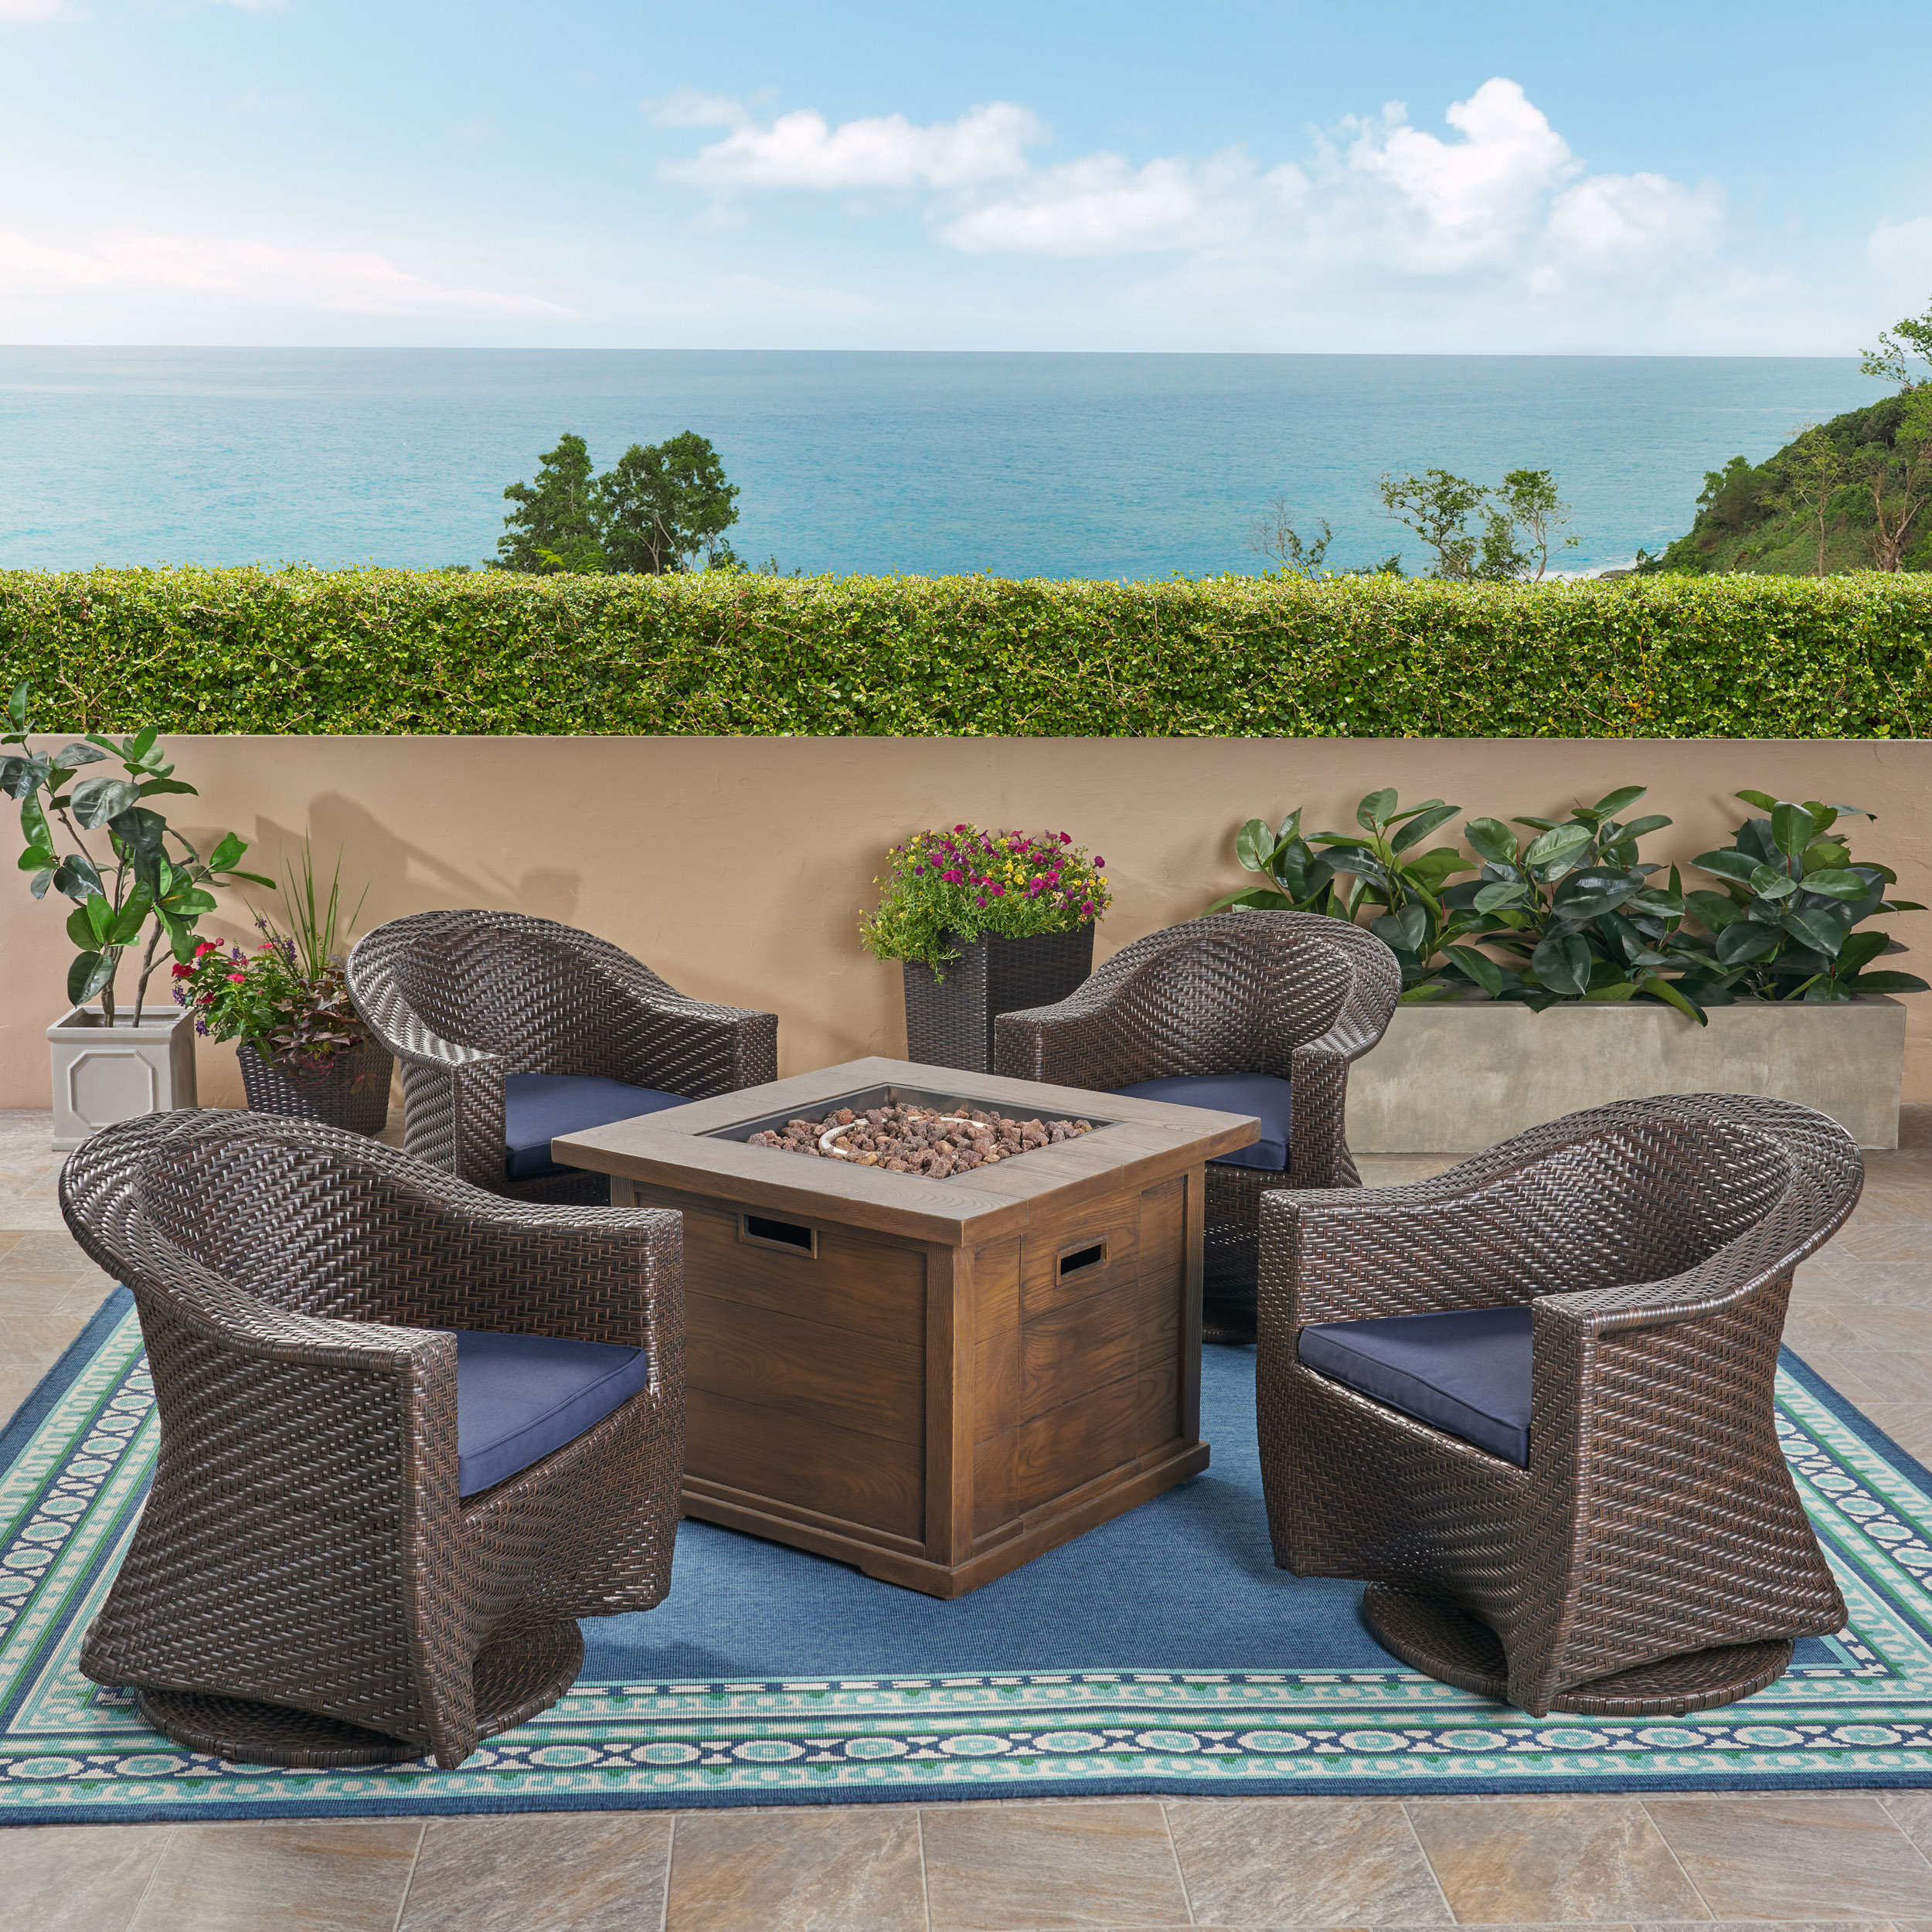 Celeste Patio Fire Pit Set, 4-Seater with Wicker Swivel Chairs, Multi-Brown, Navy Blue, Brown with Wood Design - image 1 of 10